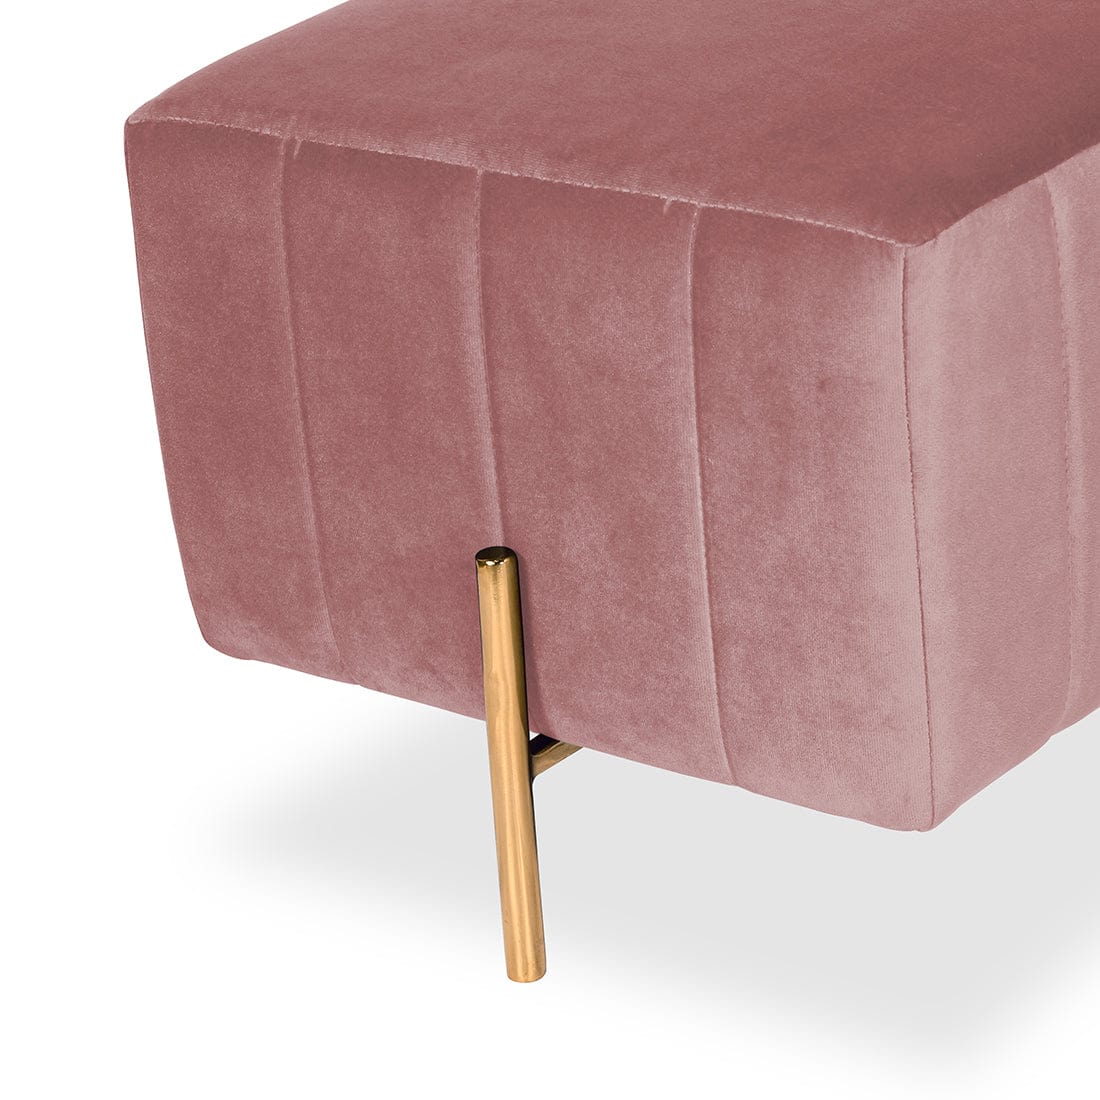 DOE BUCK SQUARE GOLD OTTOMAN STAINLESS STEEL IN PINK